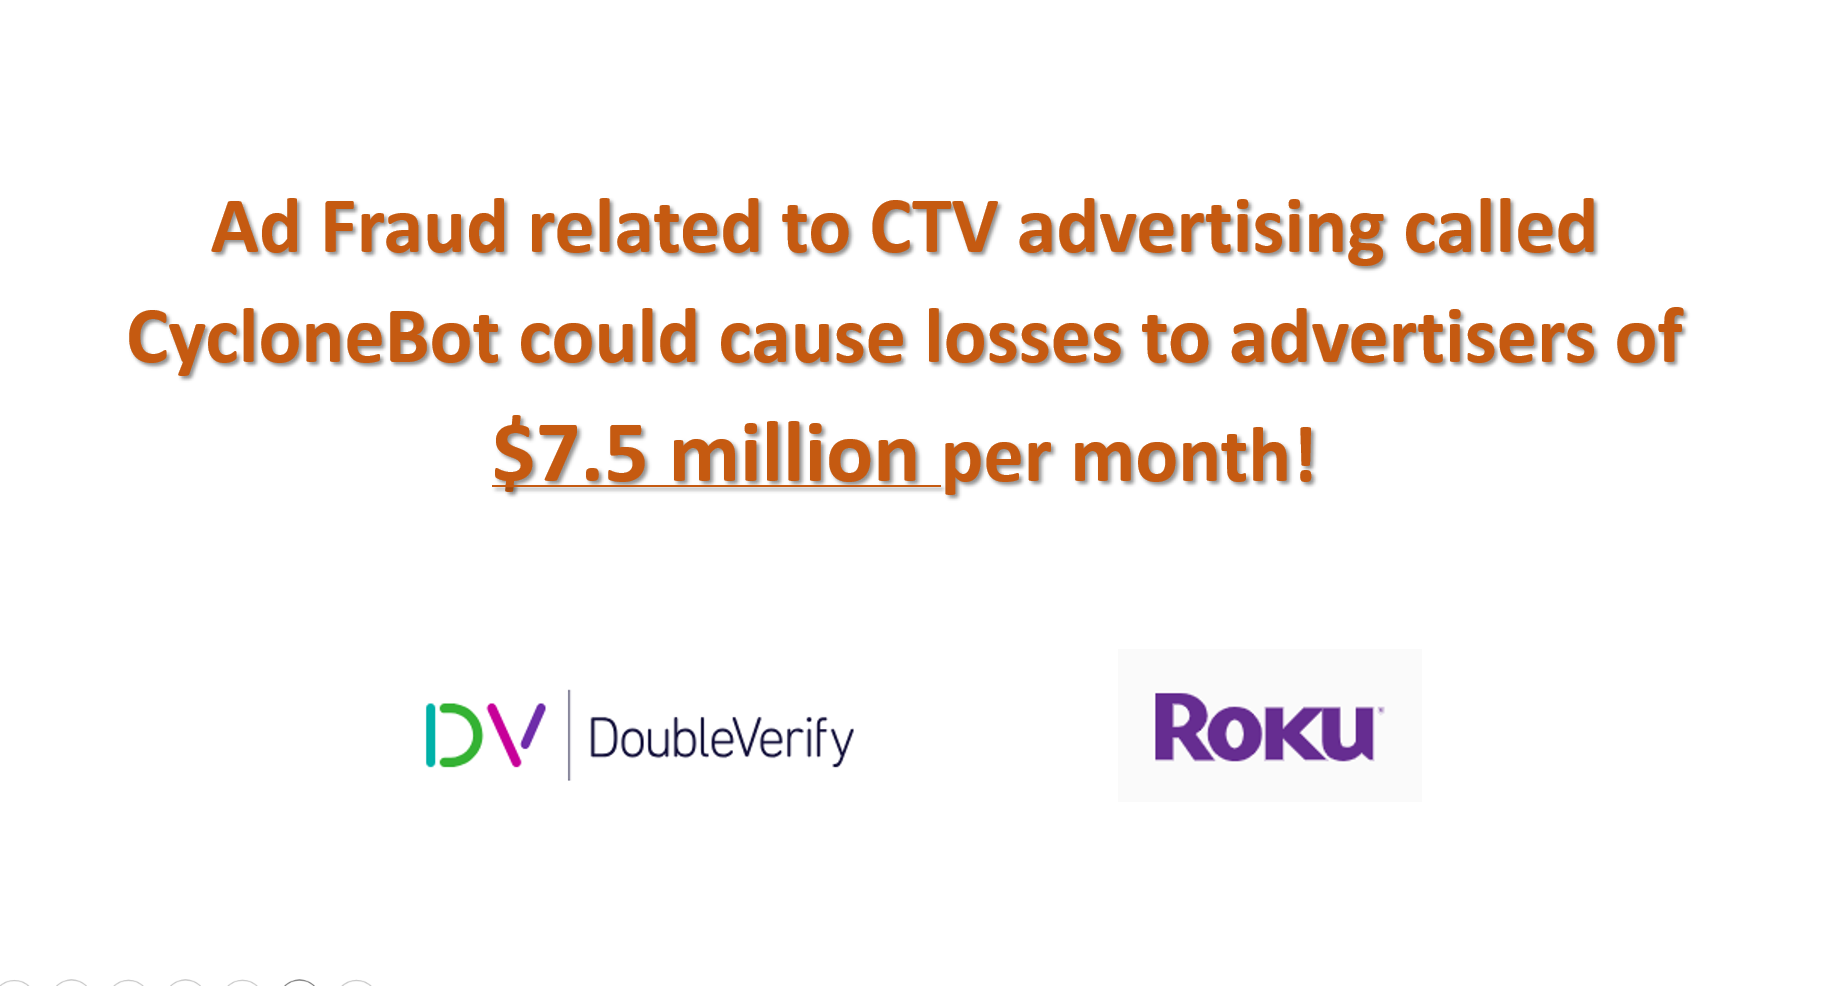 Ad Fraud related to CTV advertising called CycloneBot could cause losses to advertisers of $7.5 million per month!